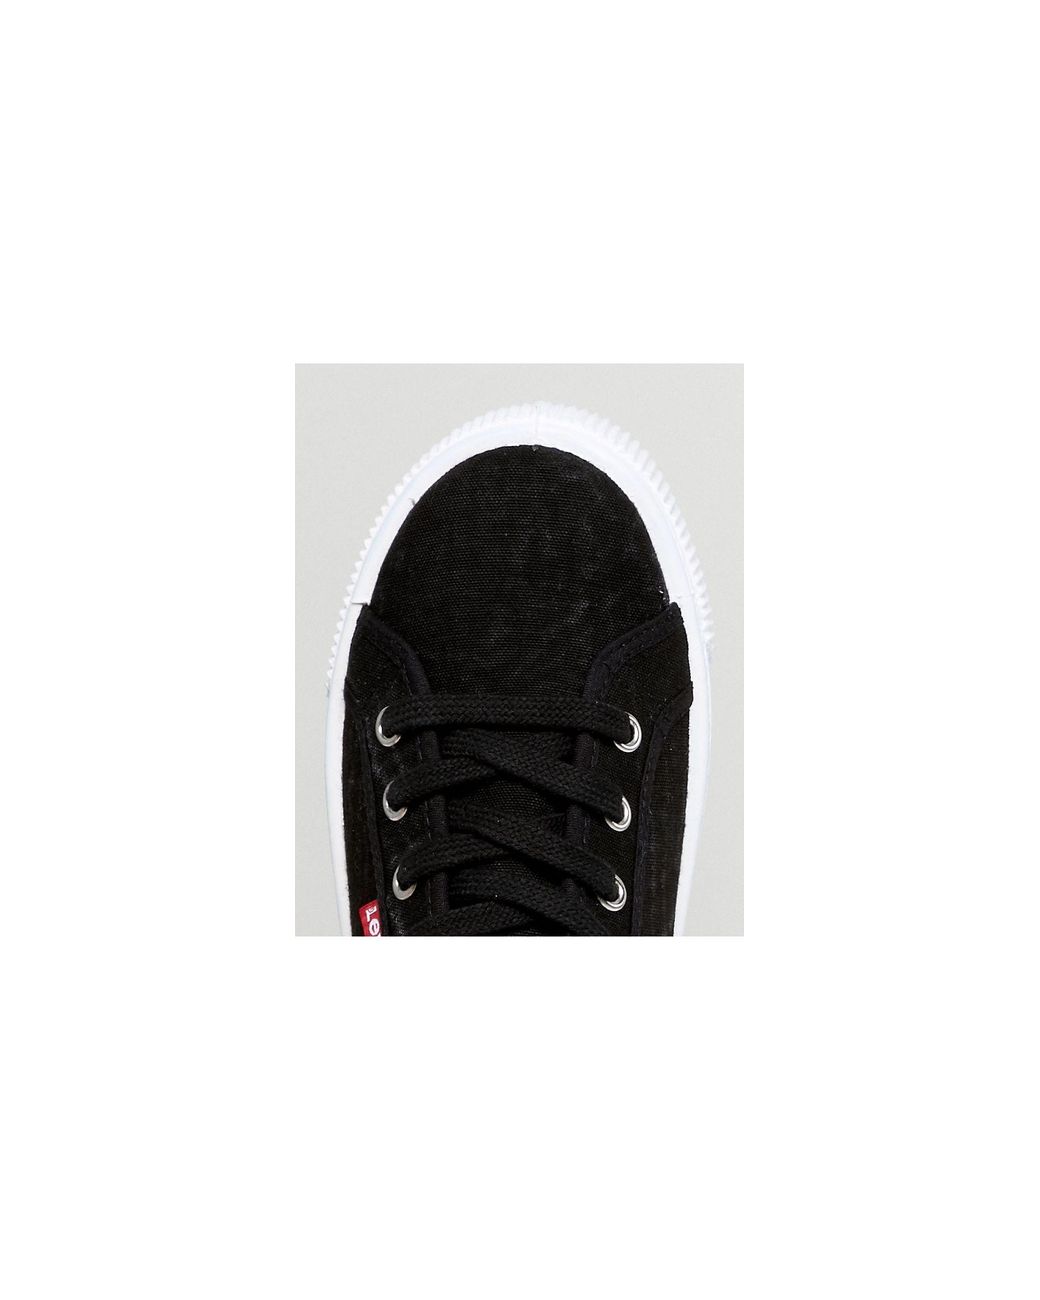 levi's canvas shoe with red tab